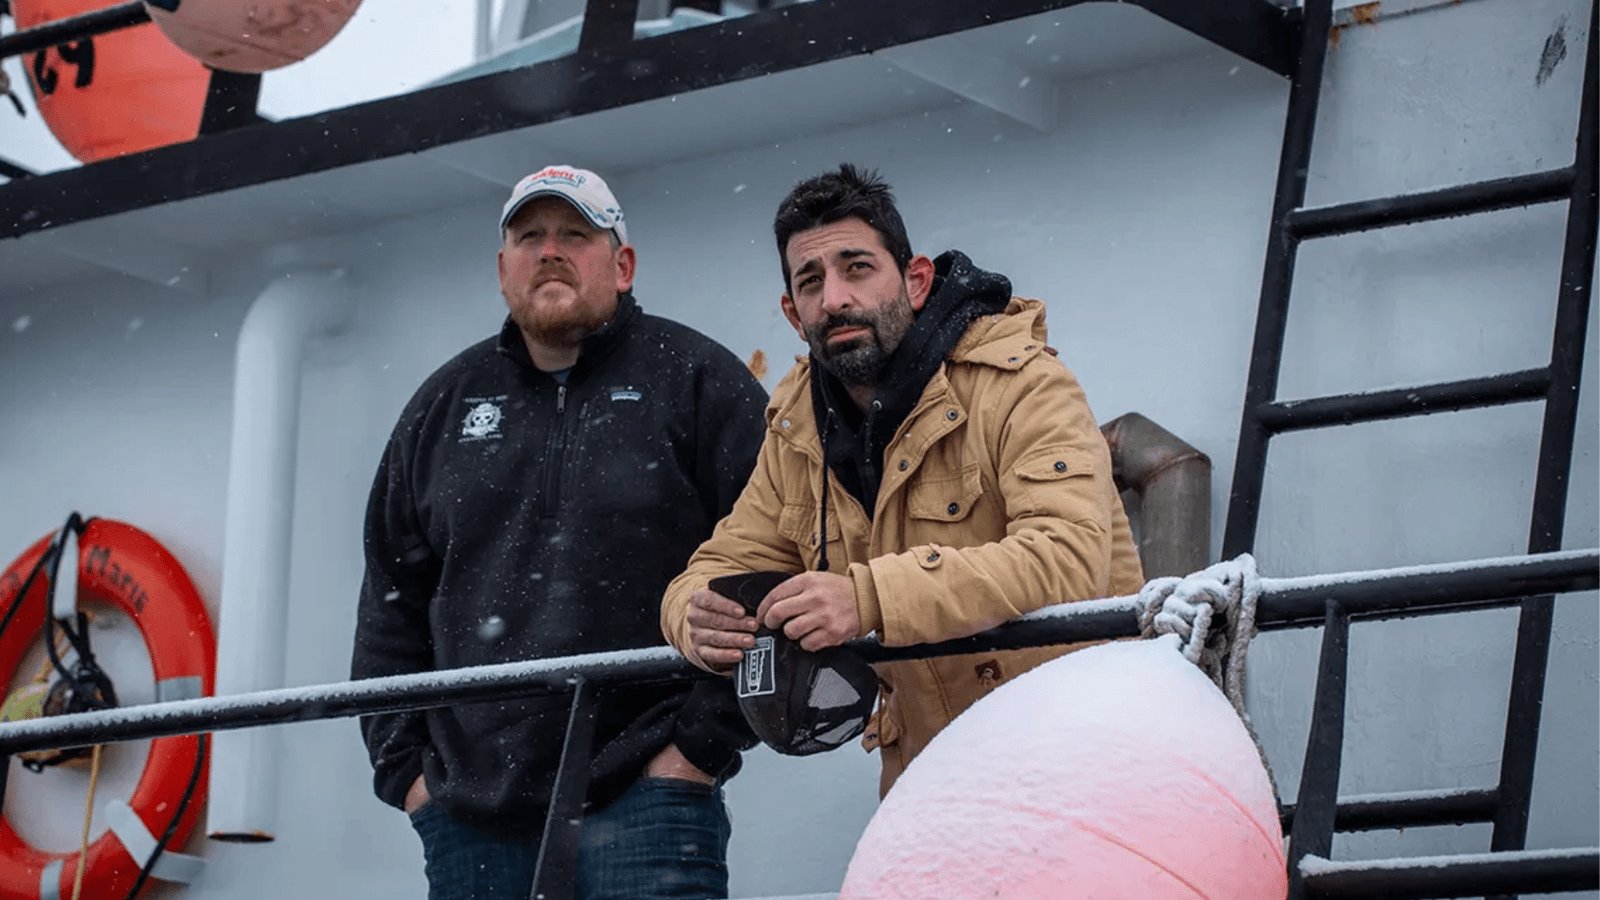 Josh Harris and Casey McManus Relationship – The Reason Behind Lost Deadliest Catch?